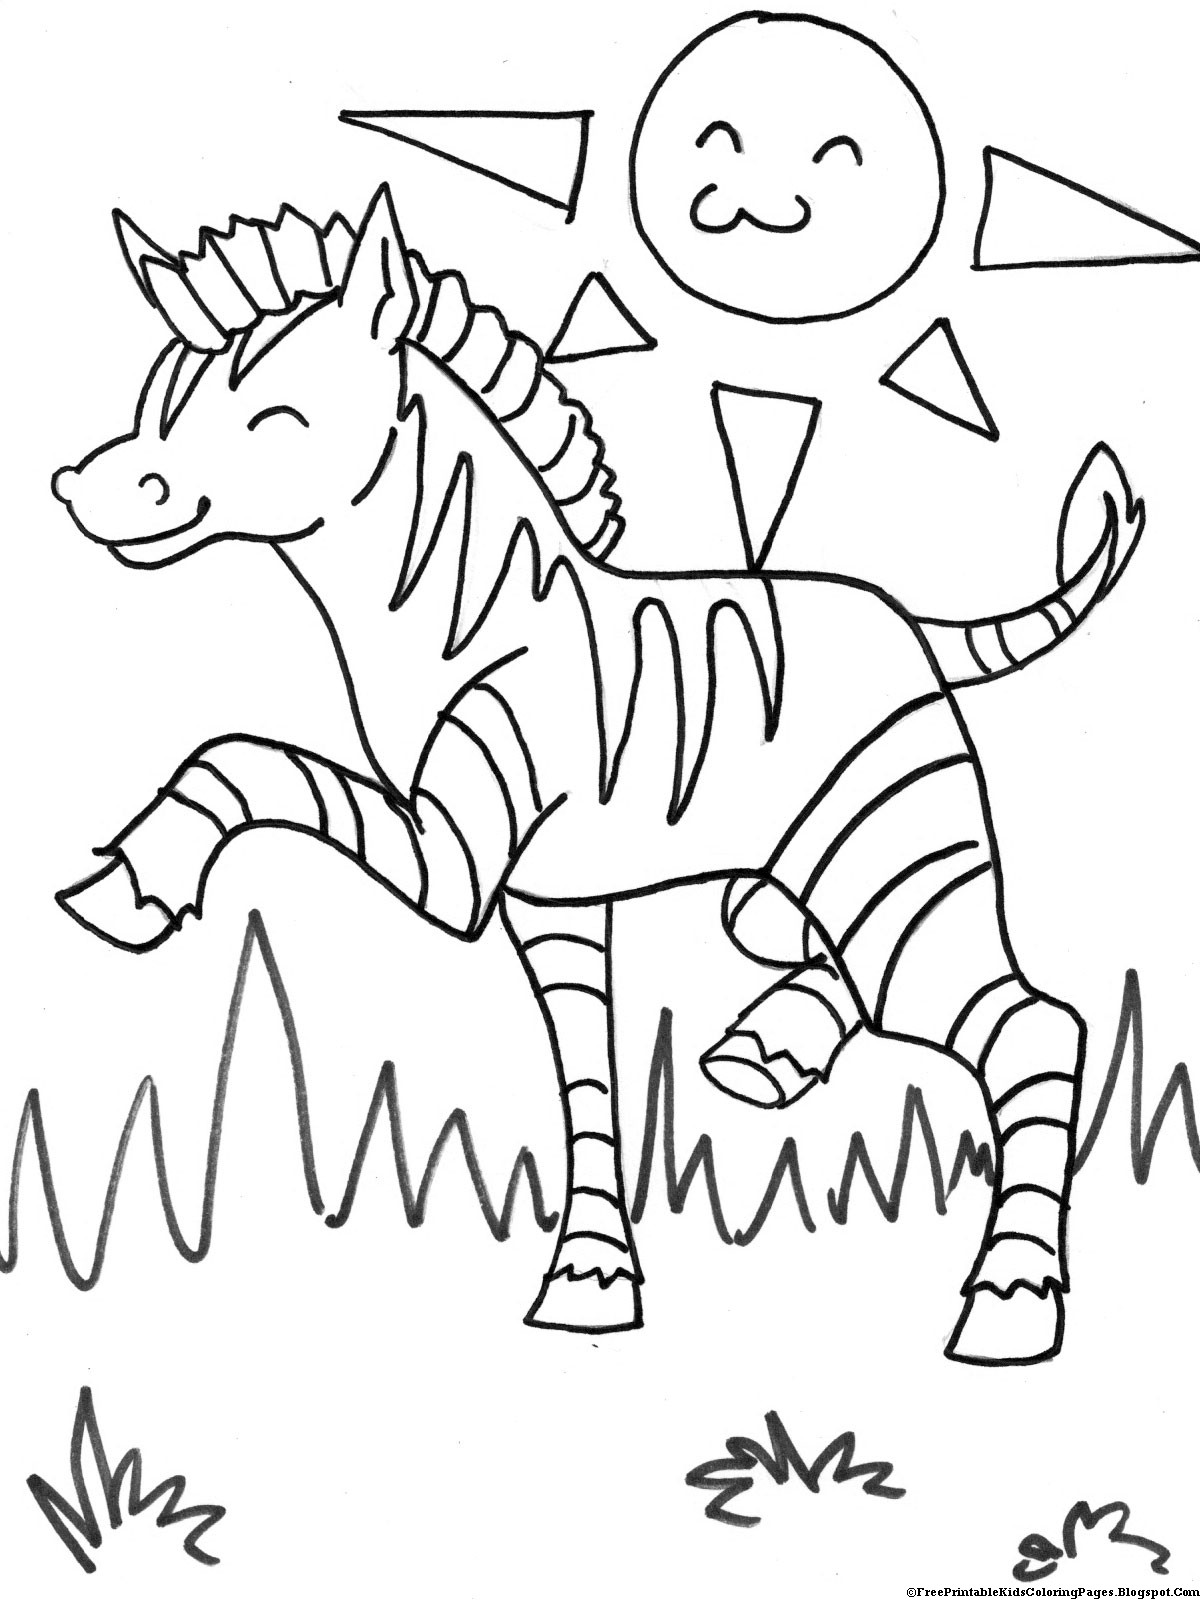 Animal Coloring Pages For Toddlers
 Zebra Coloring Pages Free Printable Kids Coloring Pages